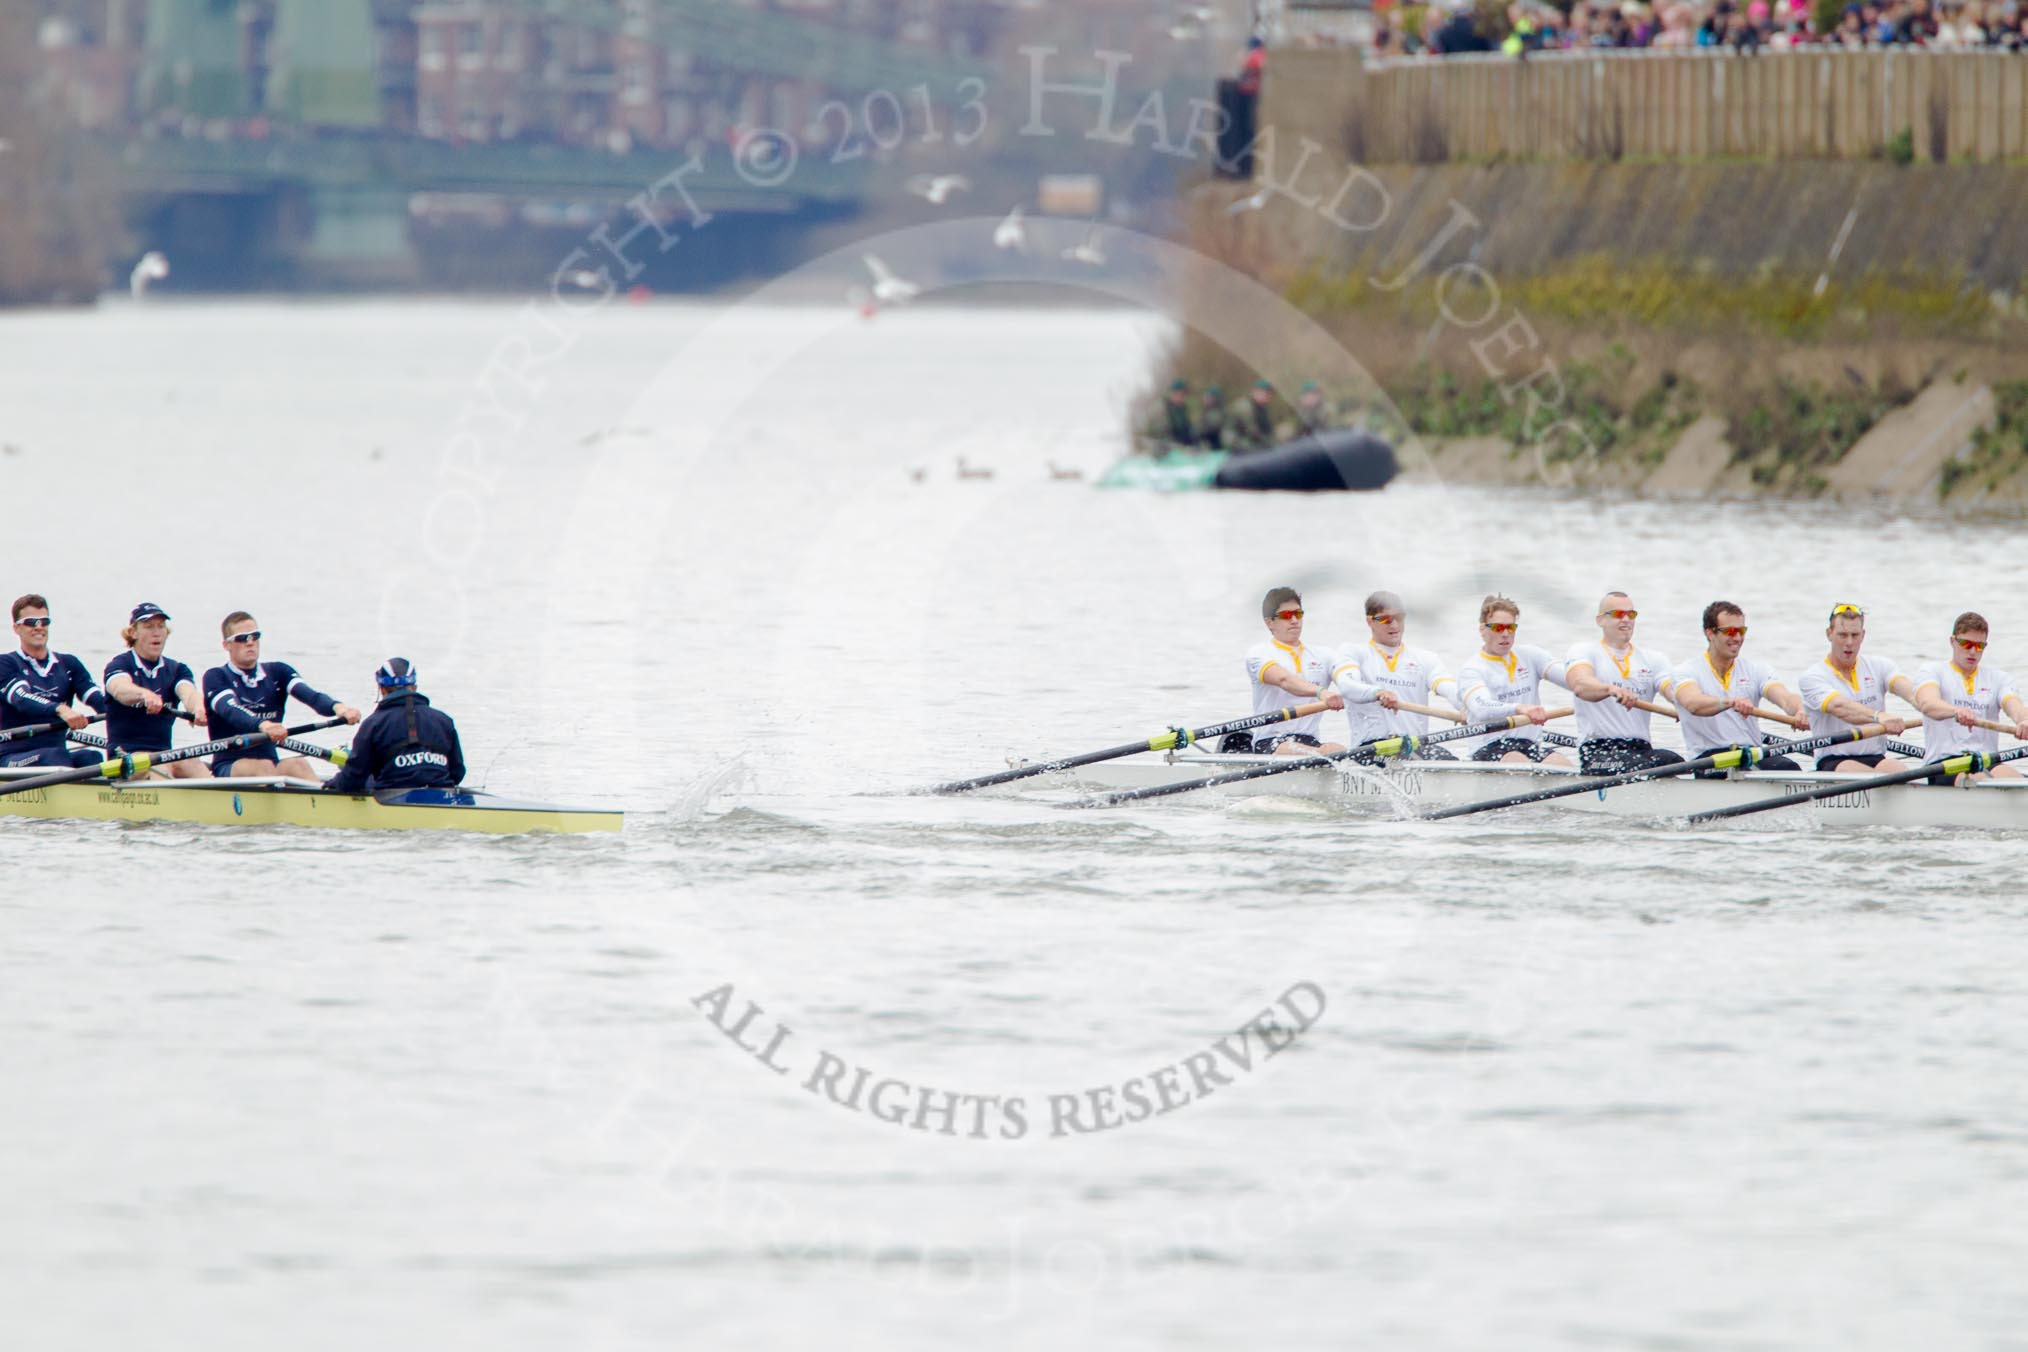 The Boat Race 2013.
Putney,
London SW15,

United Kingdom,
on 31 March 2013 at 16:01, image #189